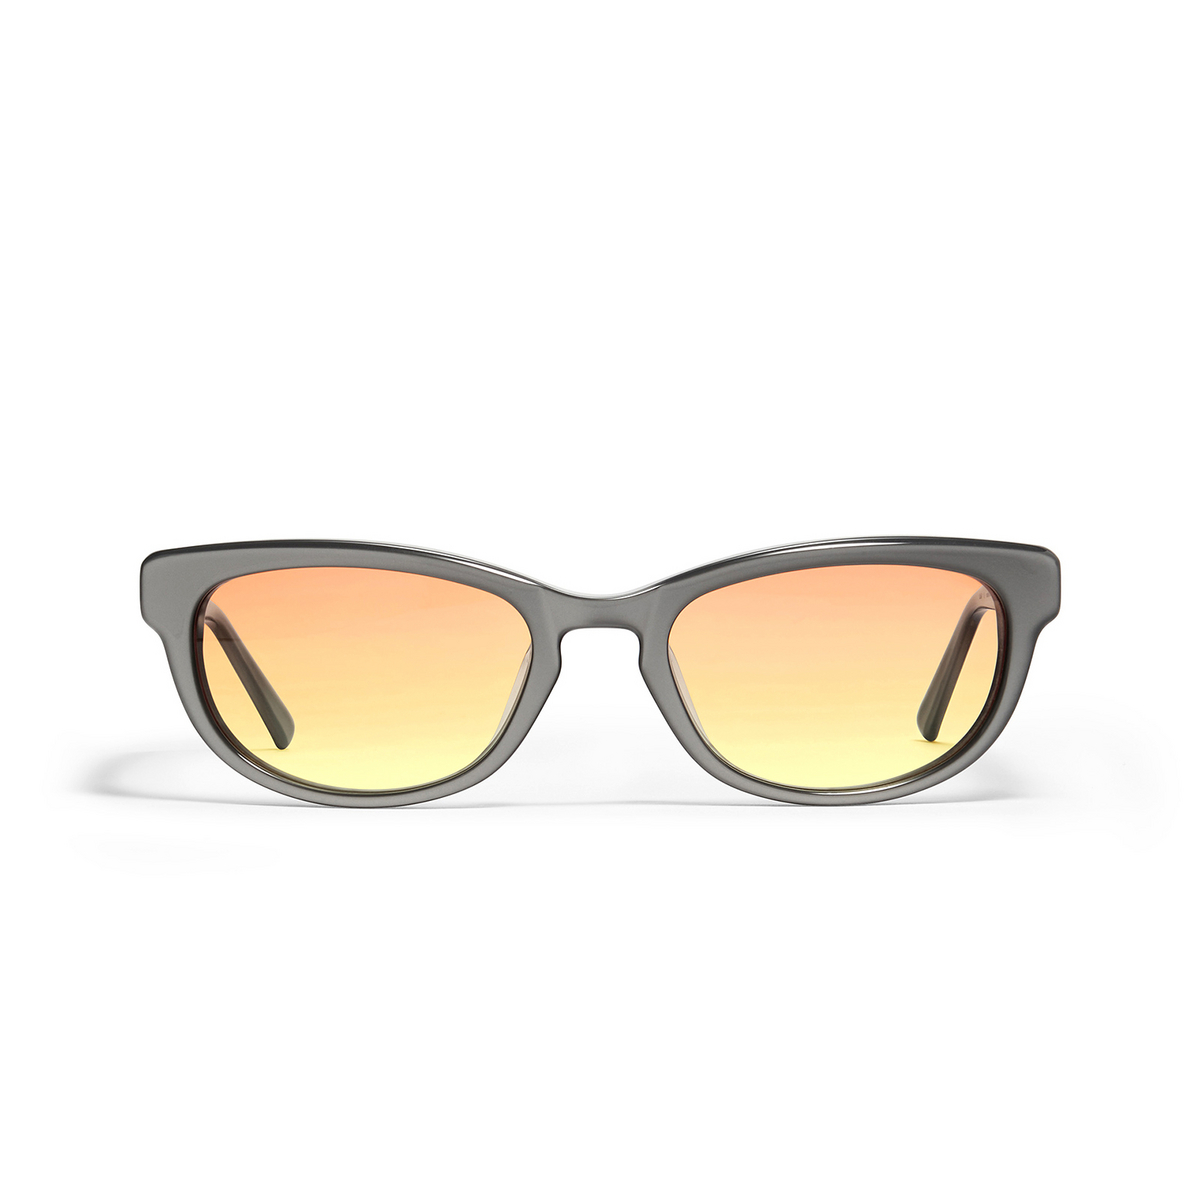 Gentle Monster RENY Sunglasses G4 Grey - front view